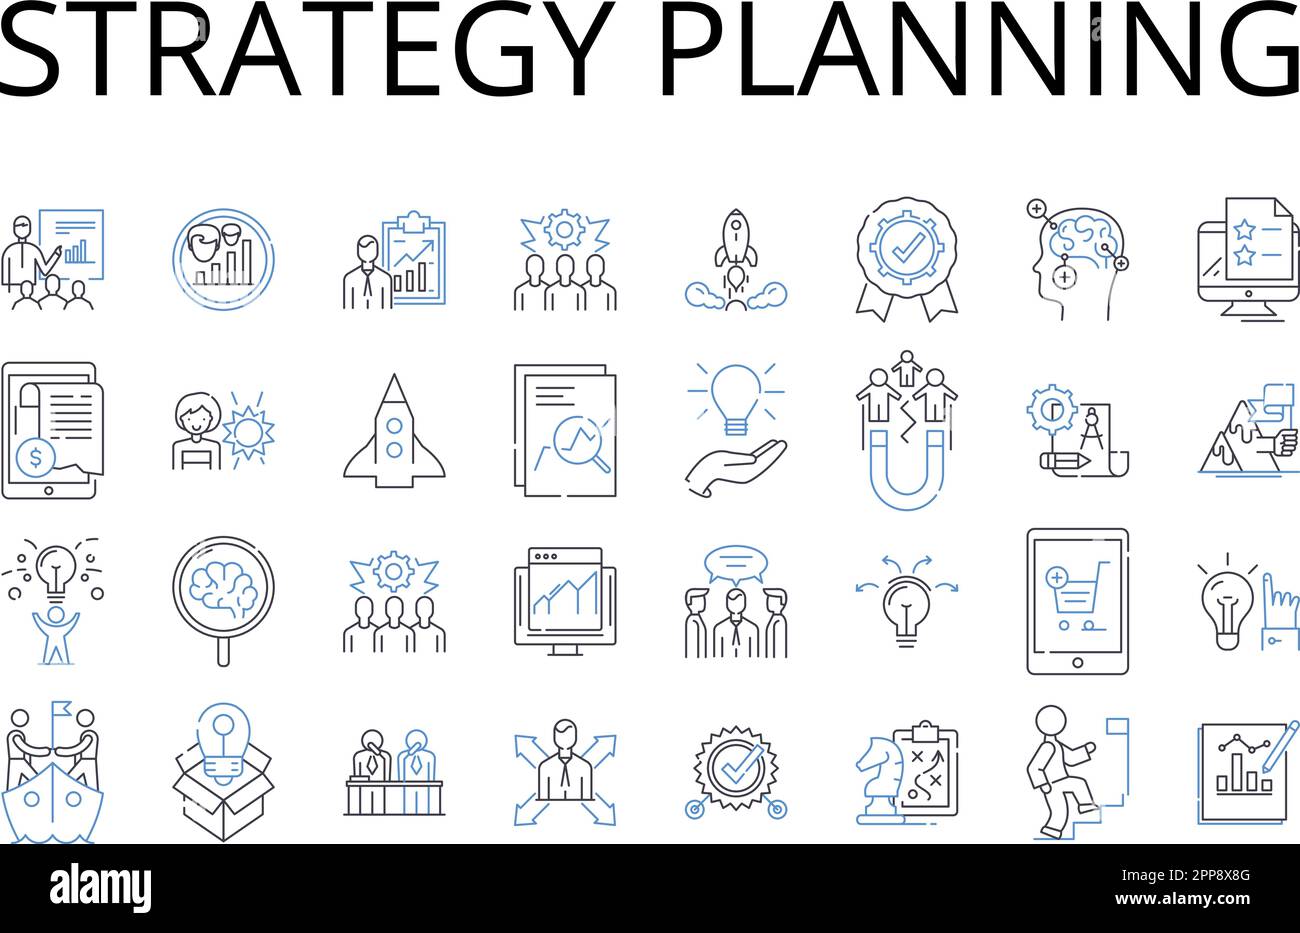 Strategy planning line icons collection. Goal setting, Action plan, Idea generating, Project mapping, Task scheduling, Decision making, Future mapping Stock Vector